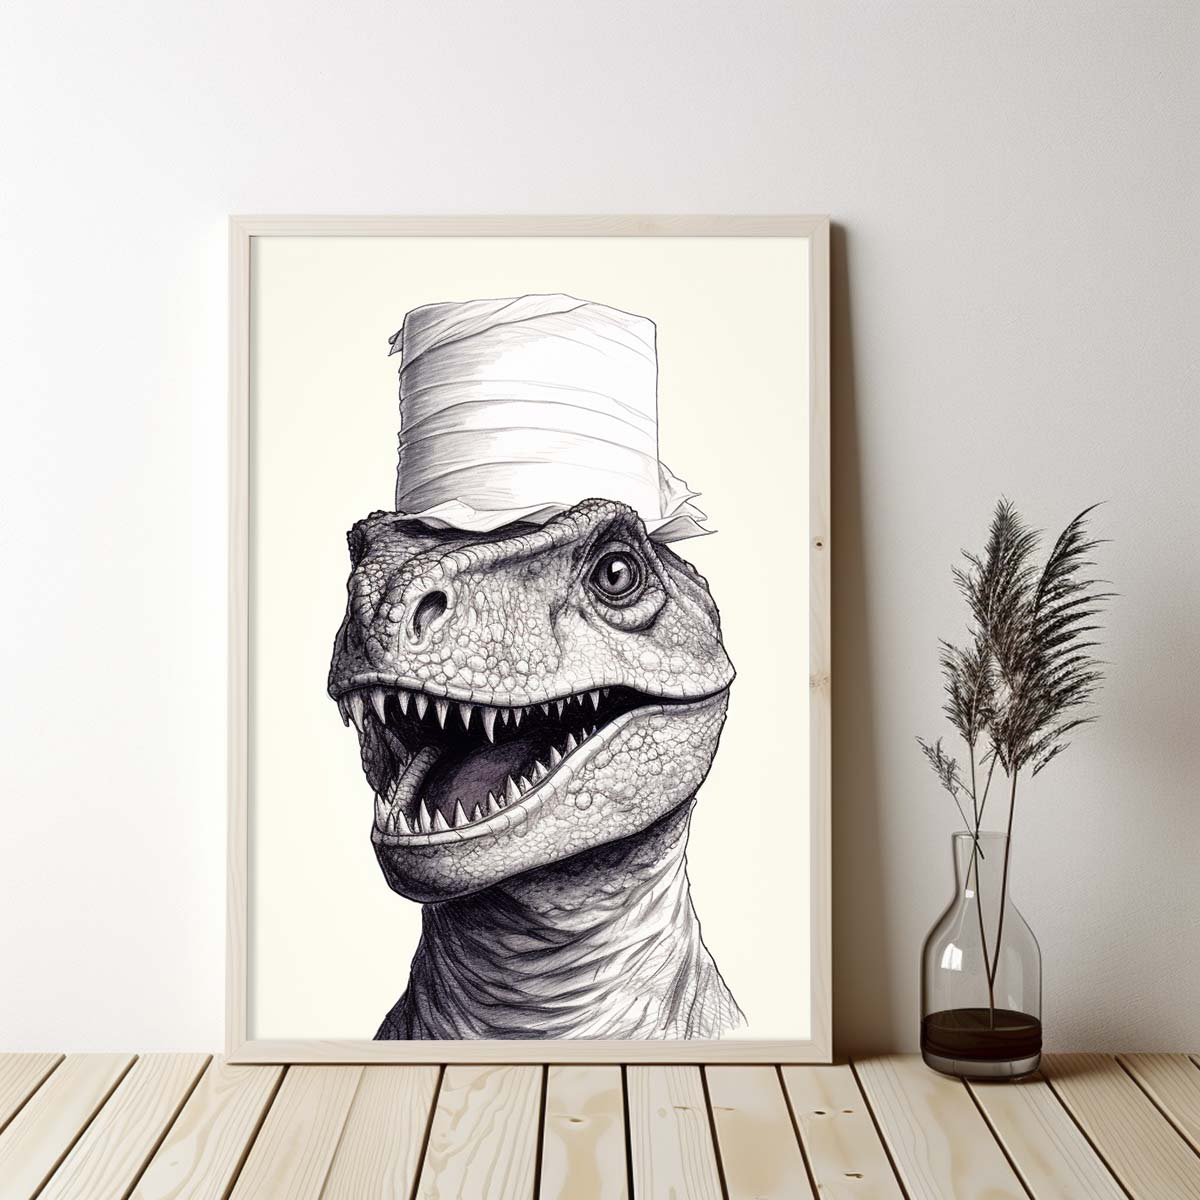 Cute Dinasour With Toilet Paper, Canvas Or Poster, Funny Dinasour Art, Bathroom Wall Decor, Home Decor, Bathroom Wall Art, Dinasour Wall Decor, Animal Decor, Animal Gift, Animal Illustration, Digital Download